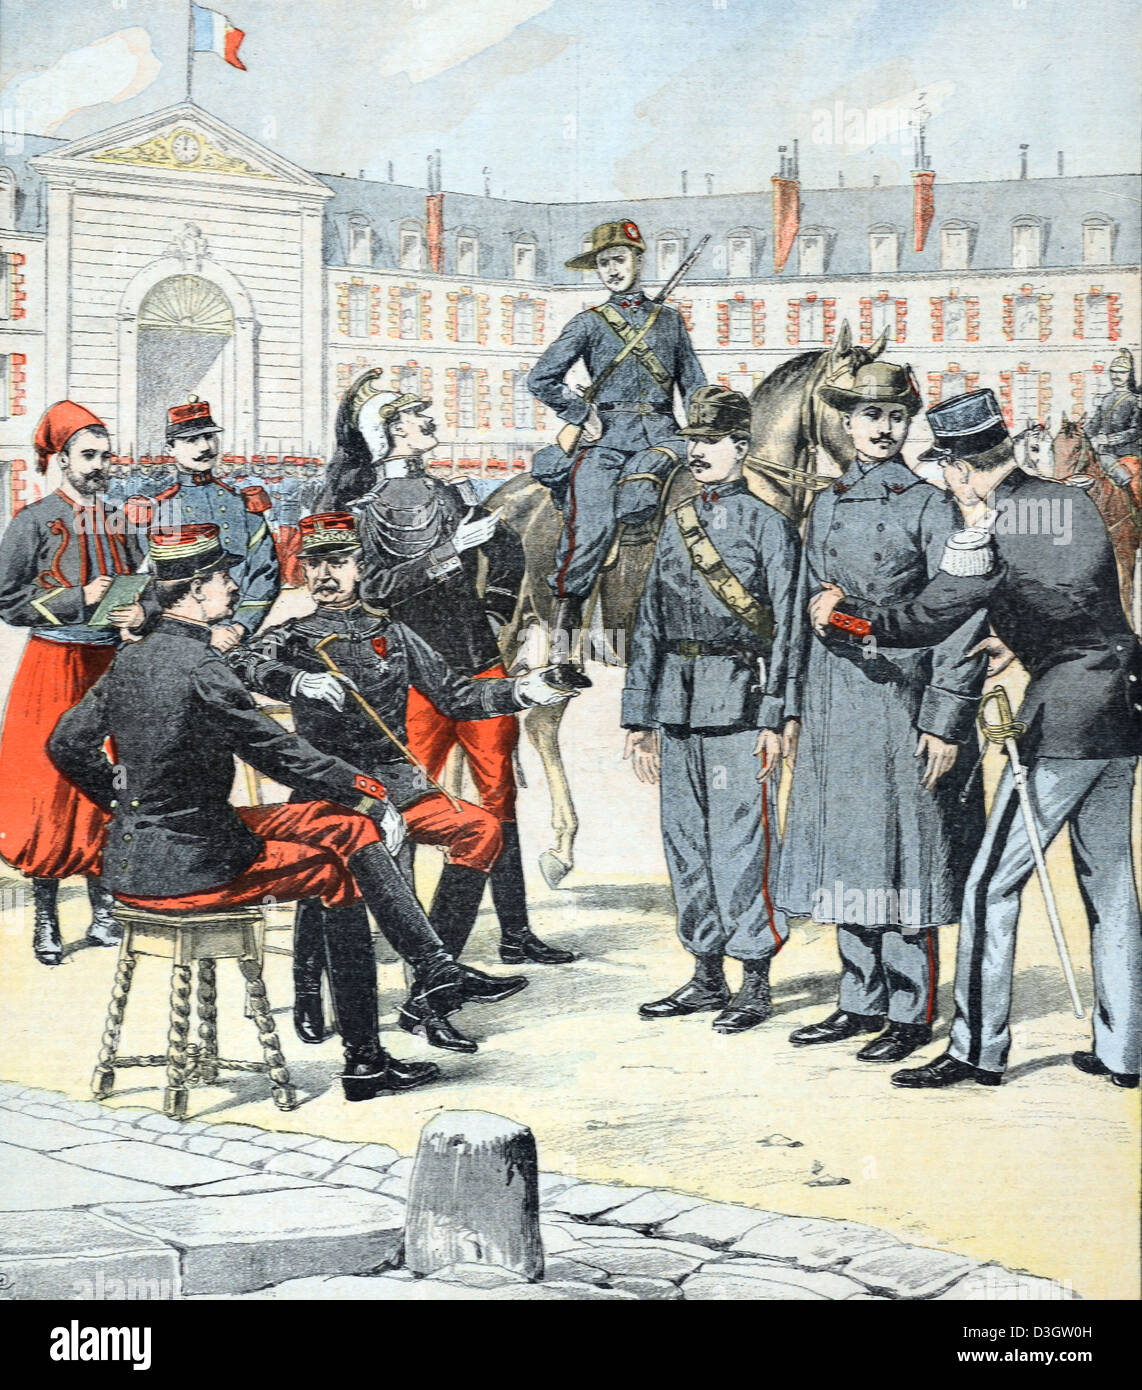 New French Uniforms for French Army or Soldiers being Presented in a Courtyard of the Hôtel des Invalides or Les Invalides Paris France (March 1903) Vintage or Old Illustration or Engraving 1903 Stock Photo